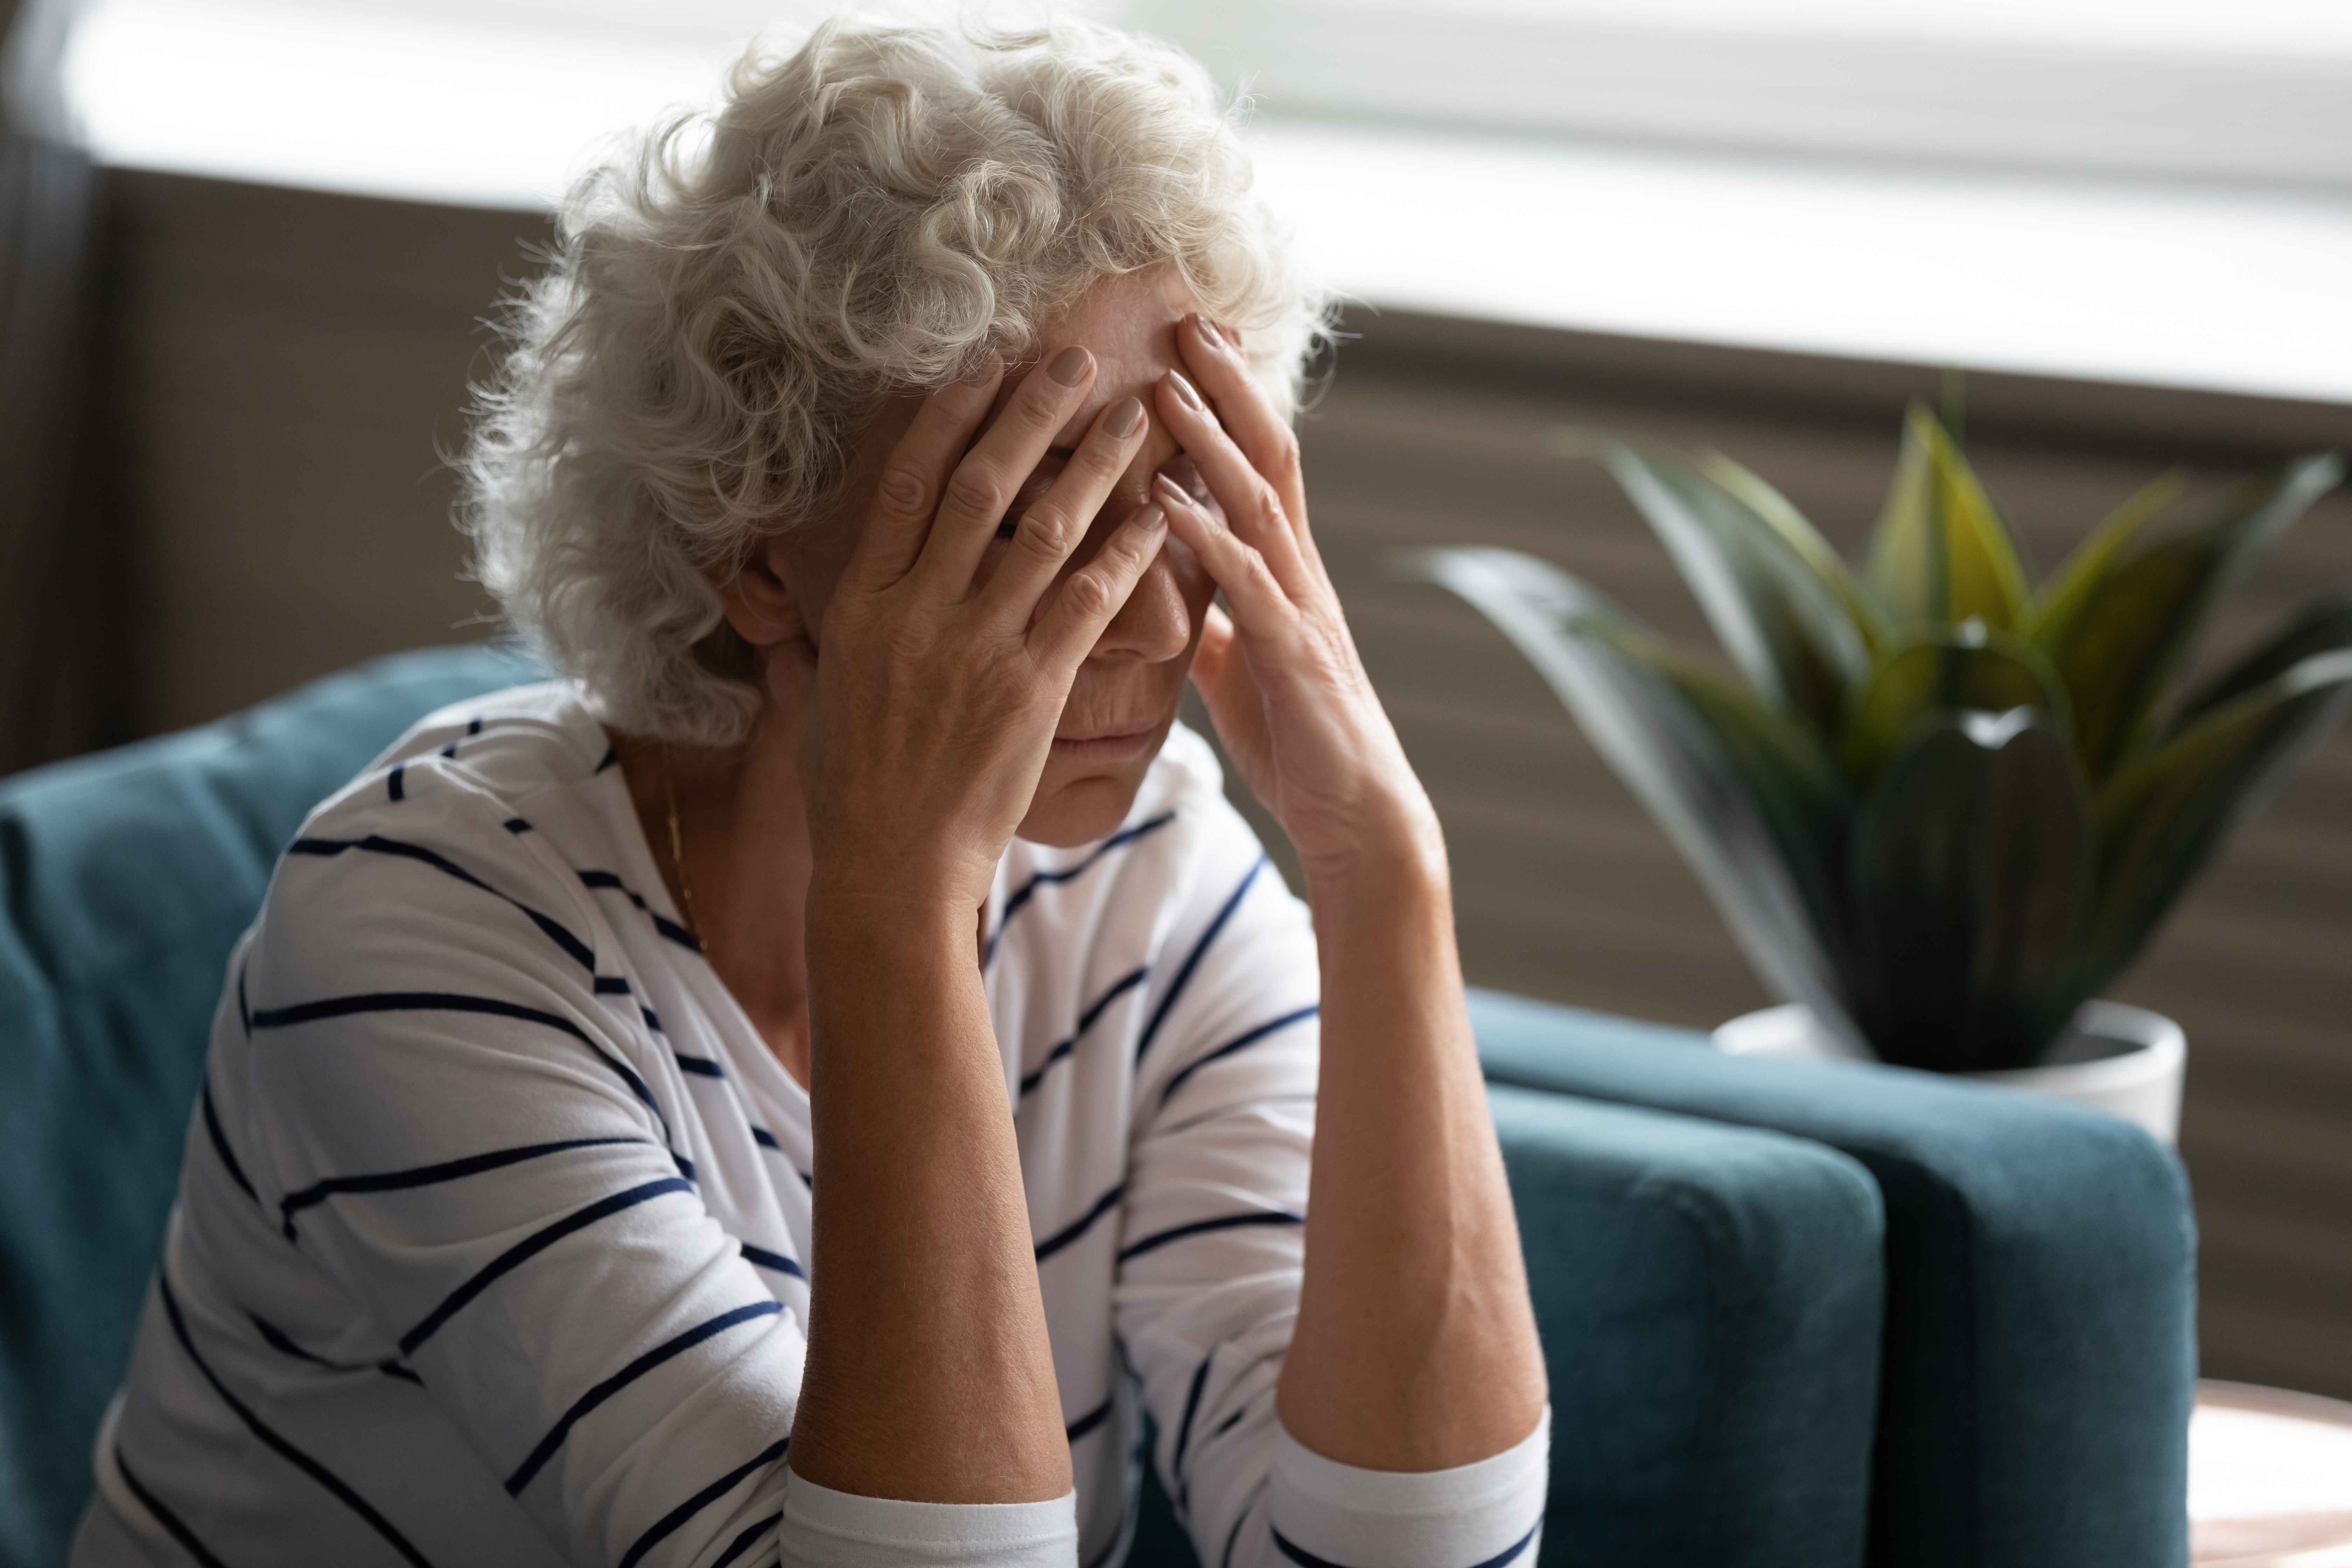 An upset older woman covering her face while seated | Source: Shutterstock